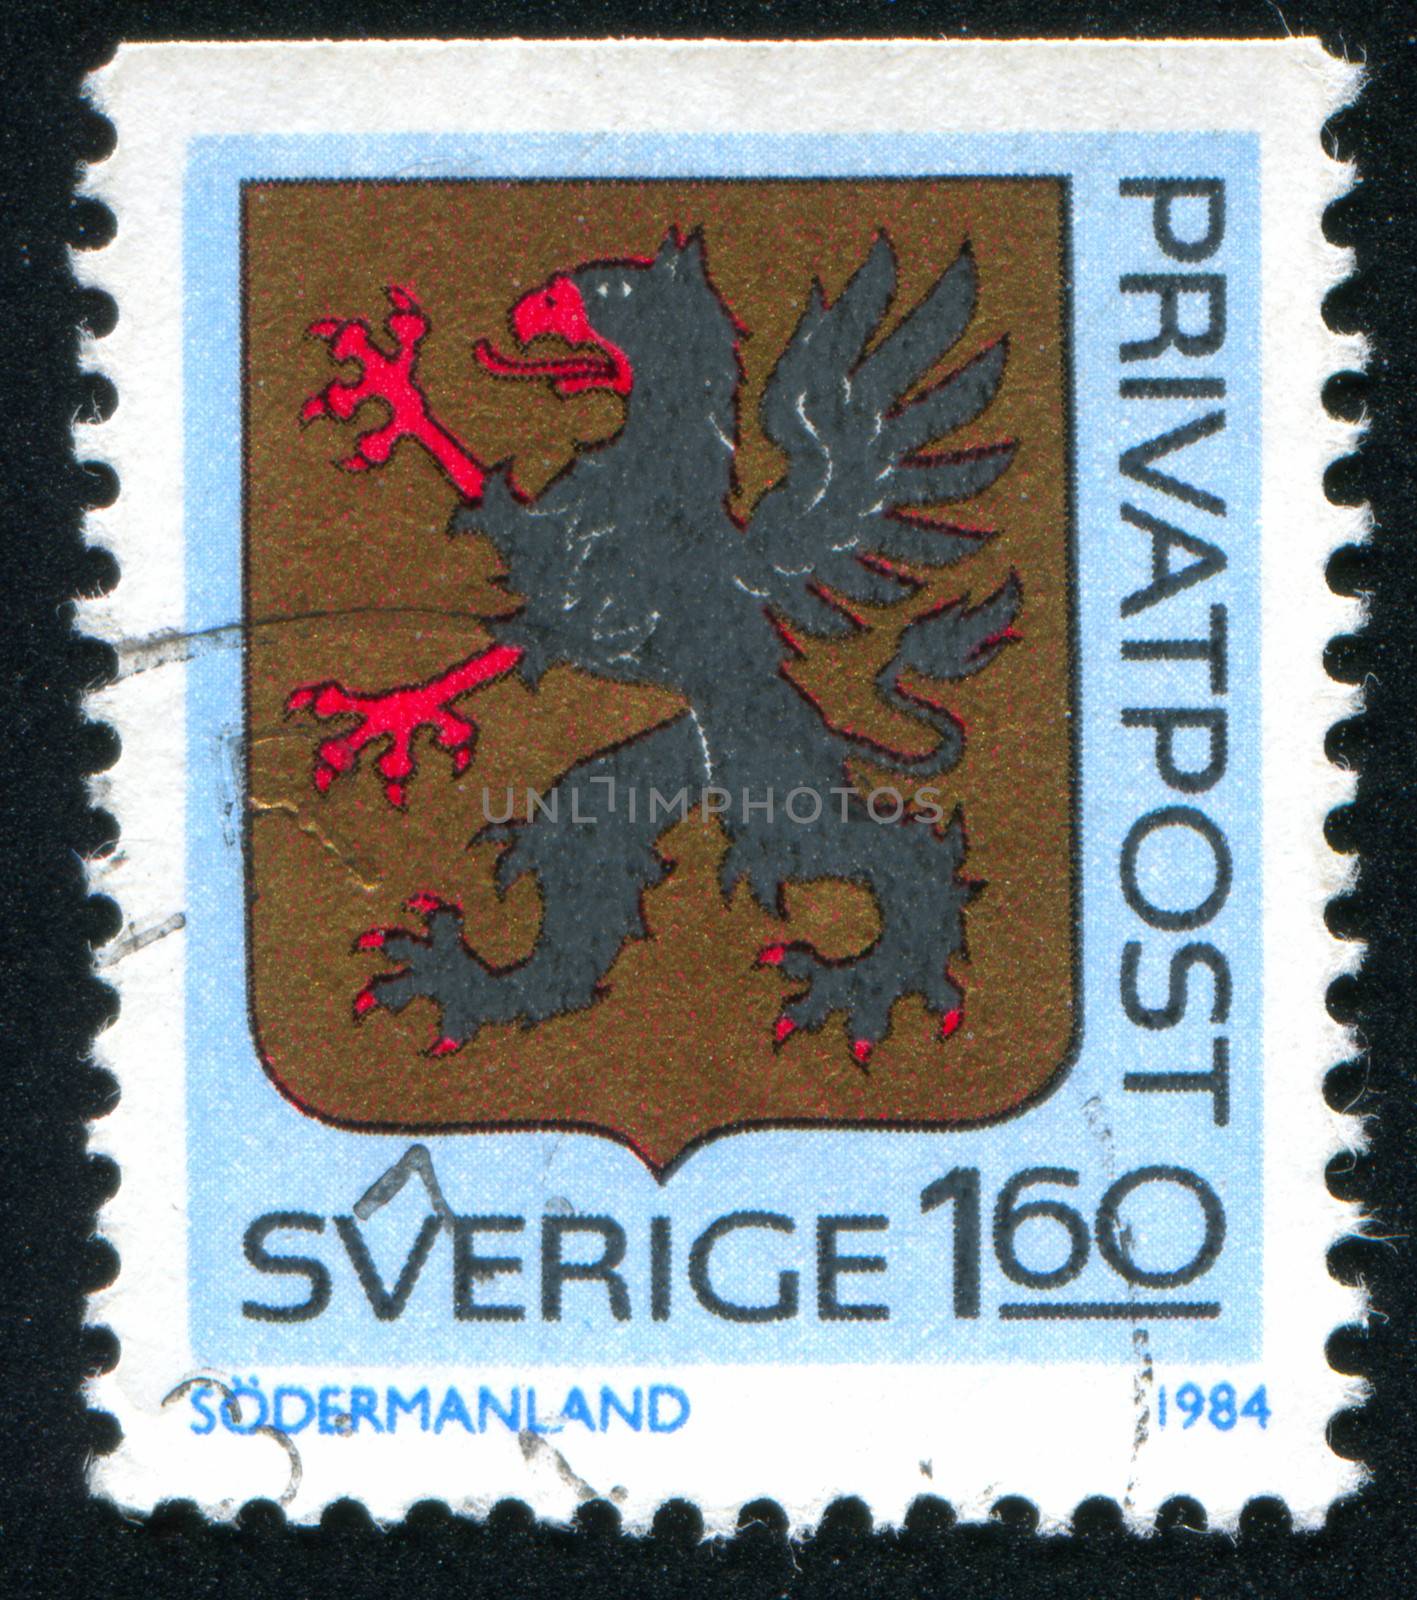 SWEDEN - CIRCA 1984: stamp printed by Sweden, shows Sodermanland Arms, circa 1984